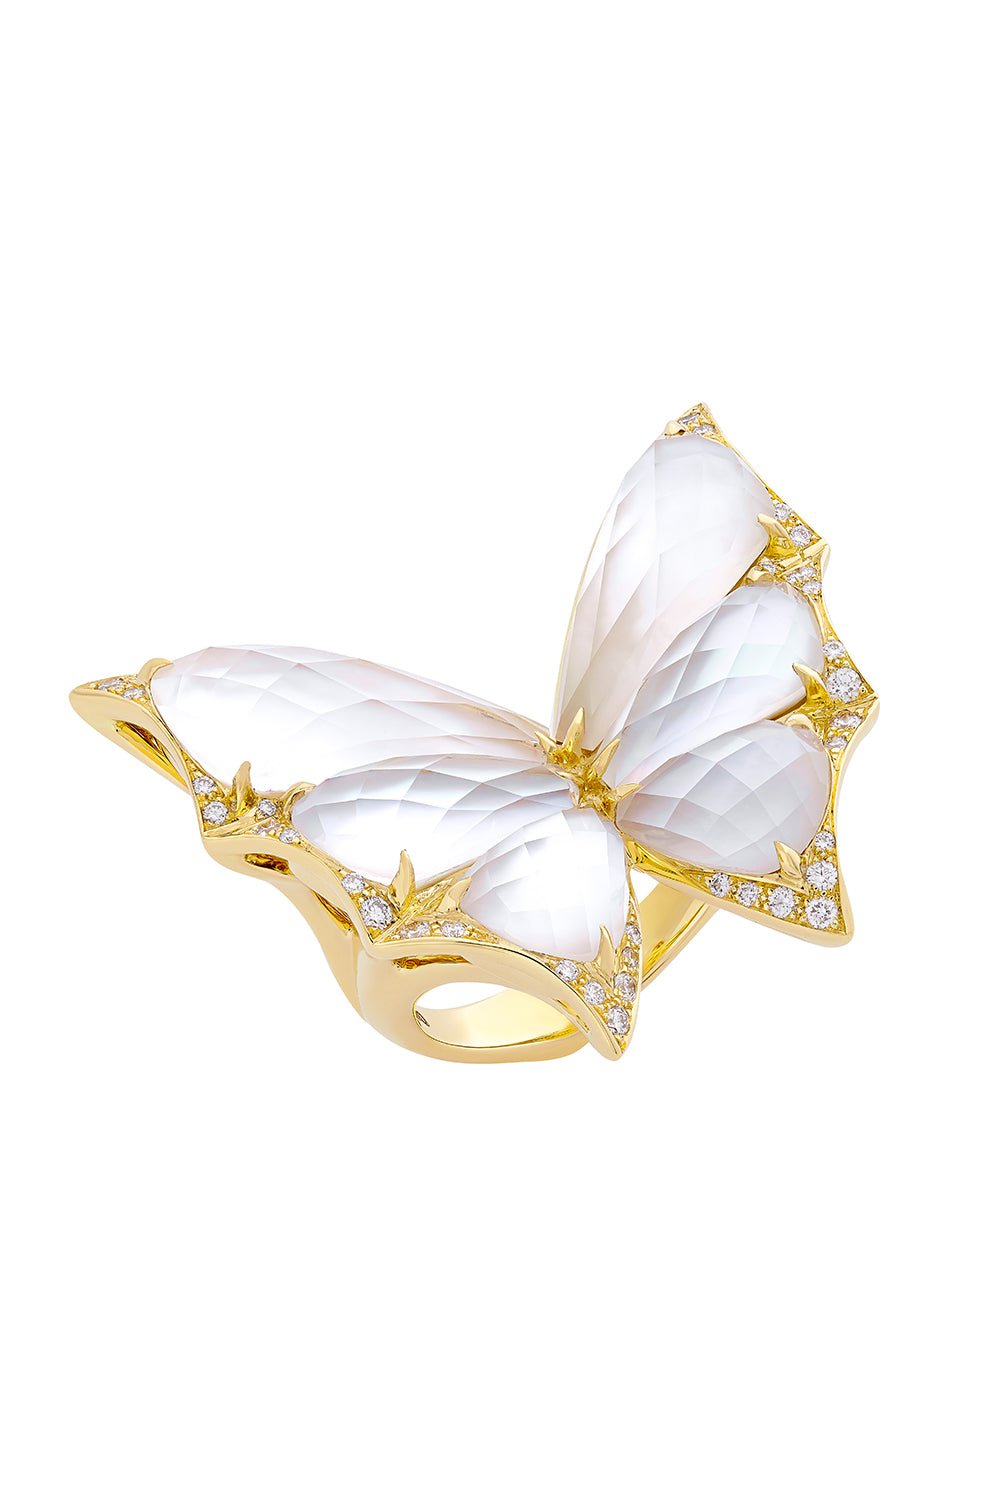 STEPHEN WEBSTER-Fly By Night Large Cocktail Ring-YELLOW GOLD